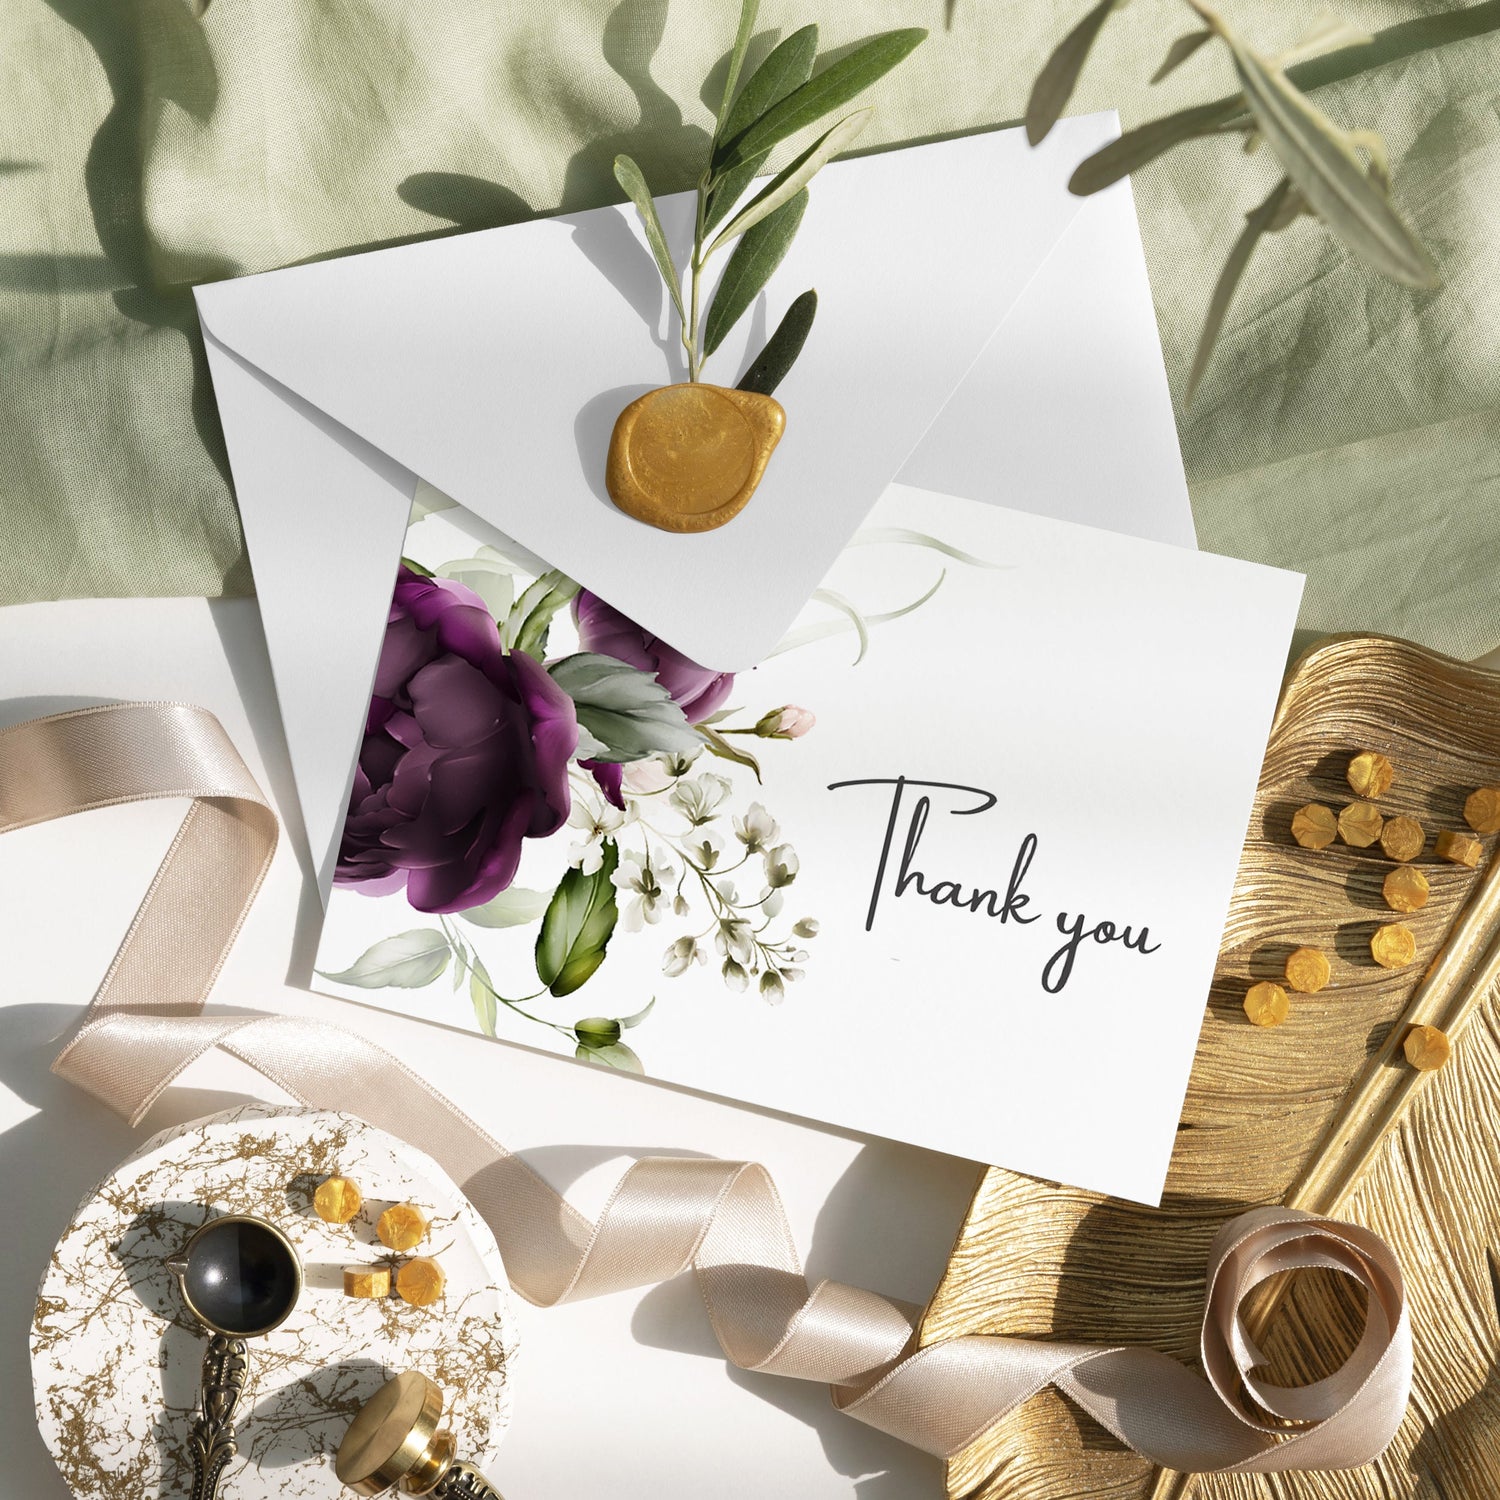 Express your gratitude with style using our thank you cards with envelop. Perfect for any themed event or daily appreciation, our cards come in a range of designs to suit your unique message. 